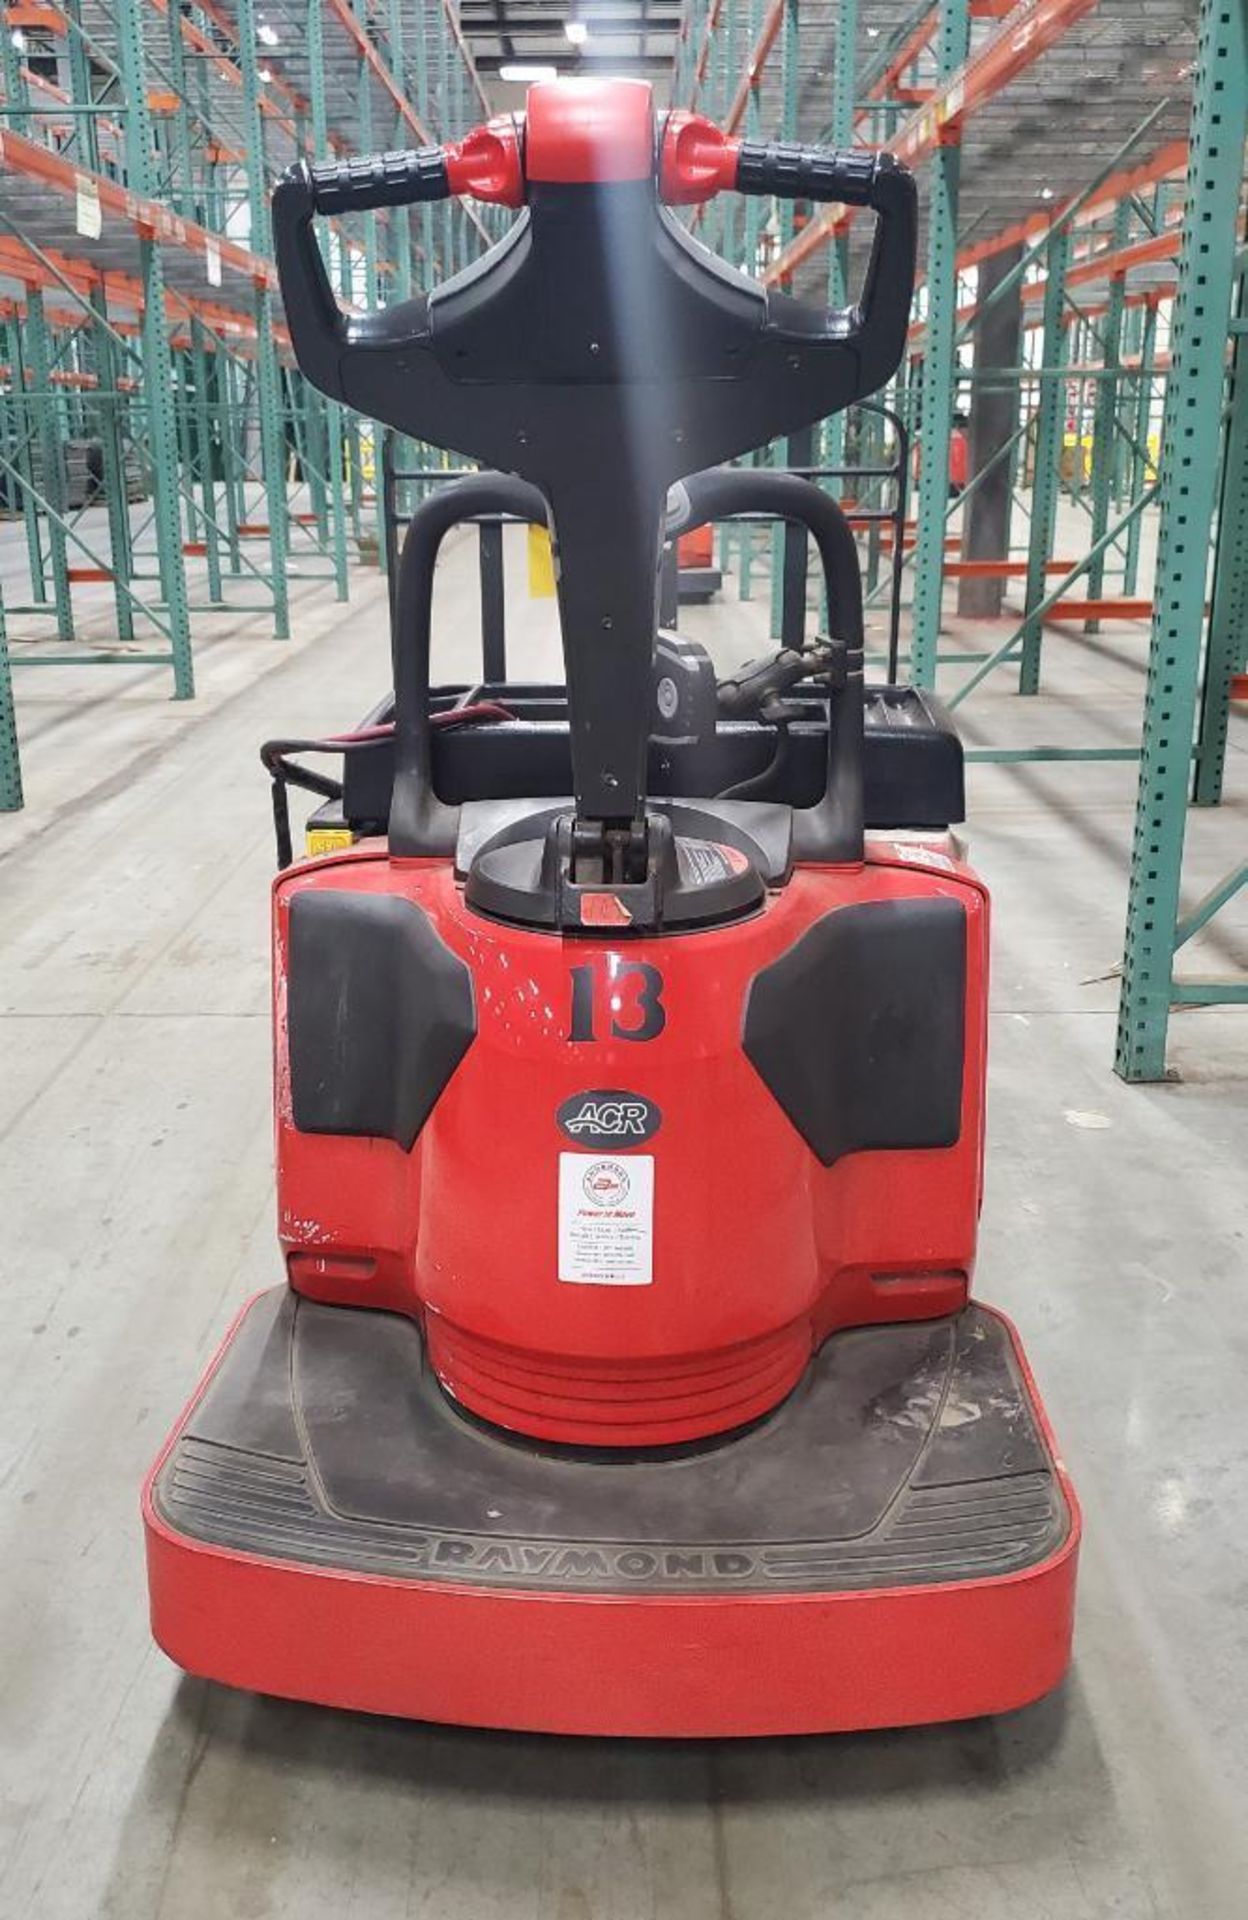 2013 RAYMOND 6,000 LB. CAPACITY ELECTRIC PALLET TRUCK; MODEL 8410, S/N 841-13-17109, WITH IWAREHOUSE